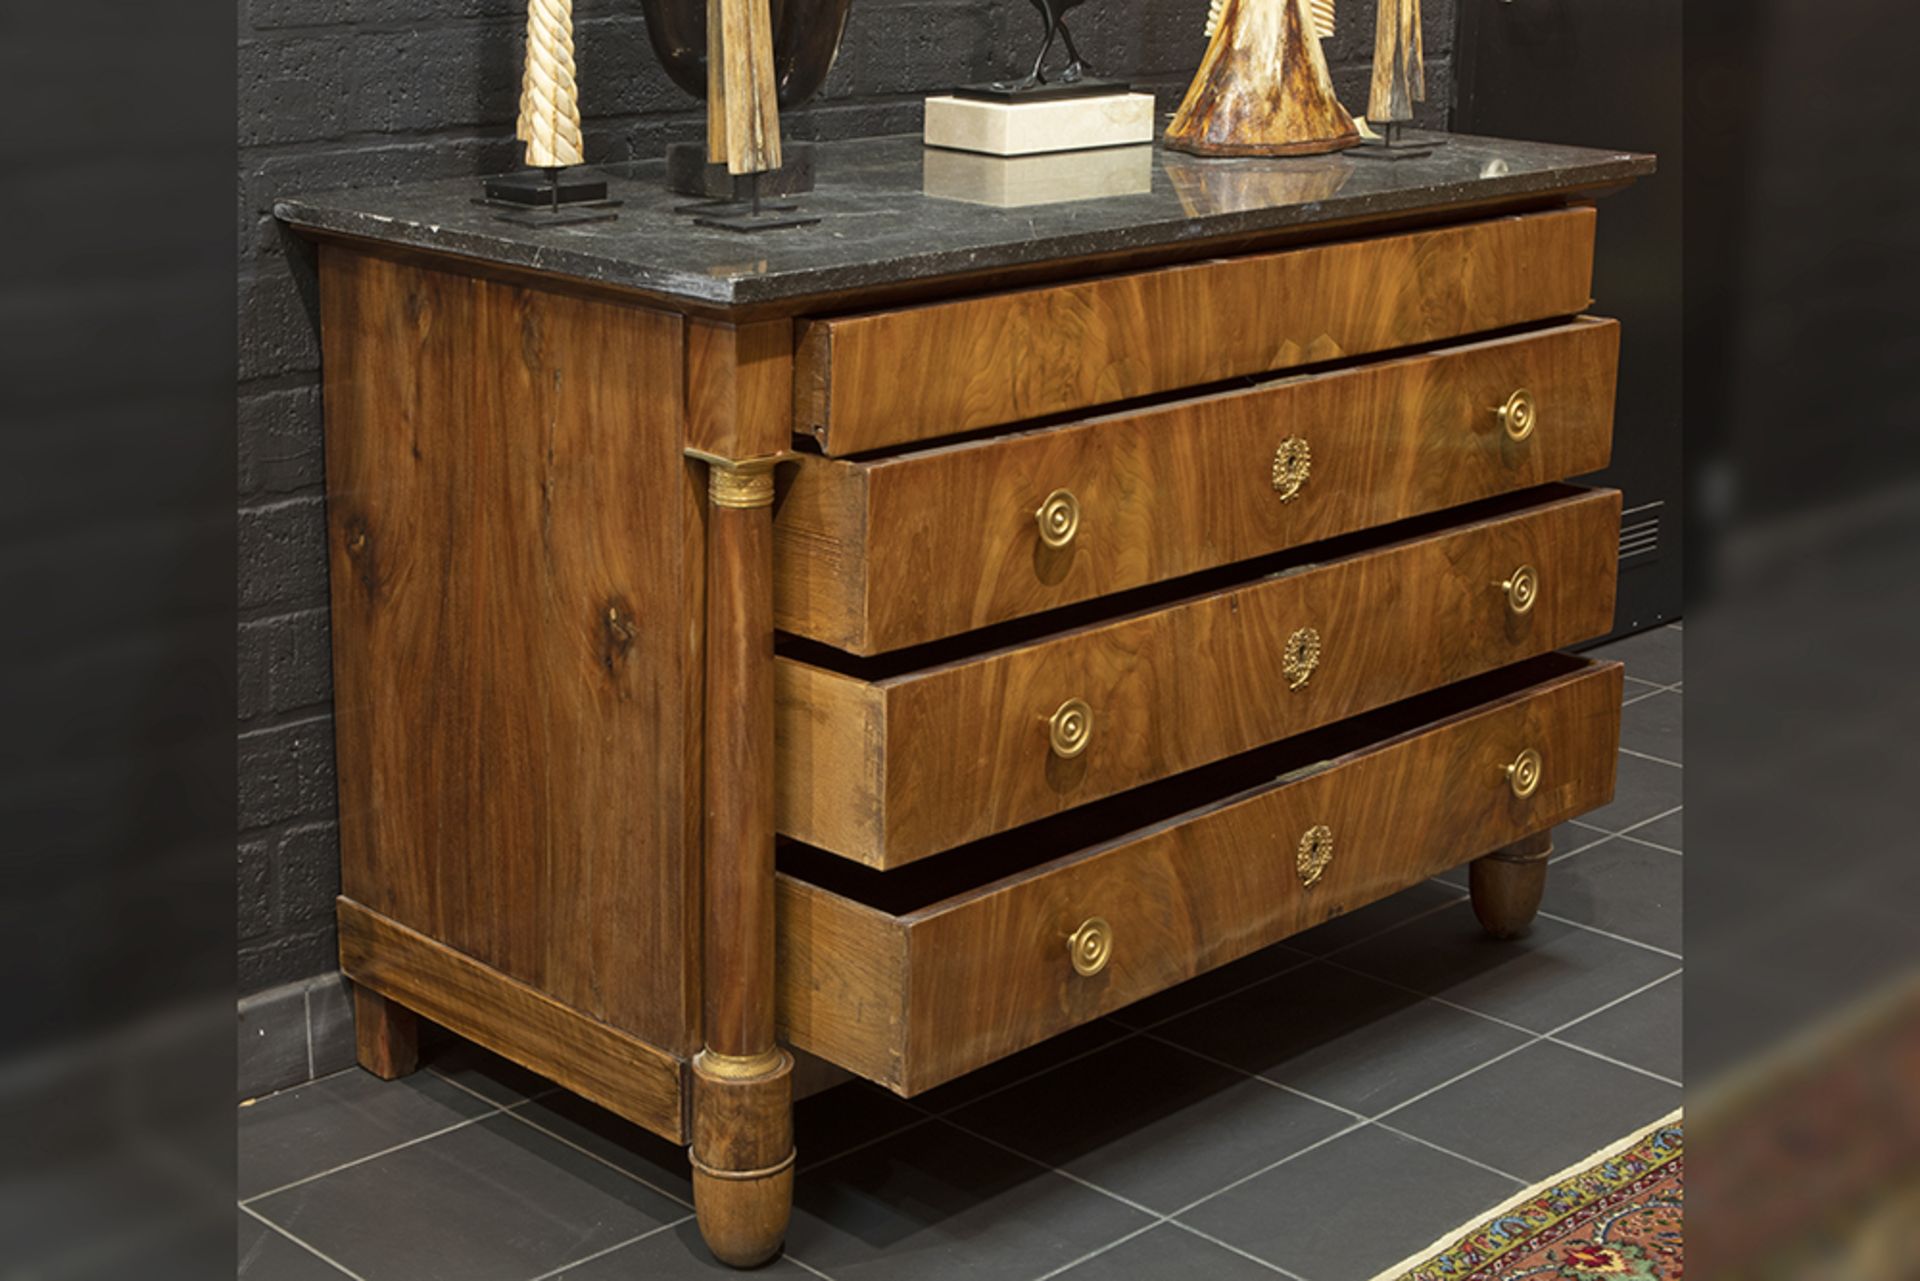 early 19th Cent. French Empire period chest of drawers in mahogany with mountings in gilded bronze - Bild 2 aus 2